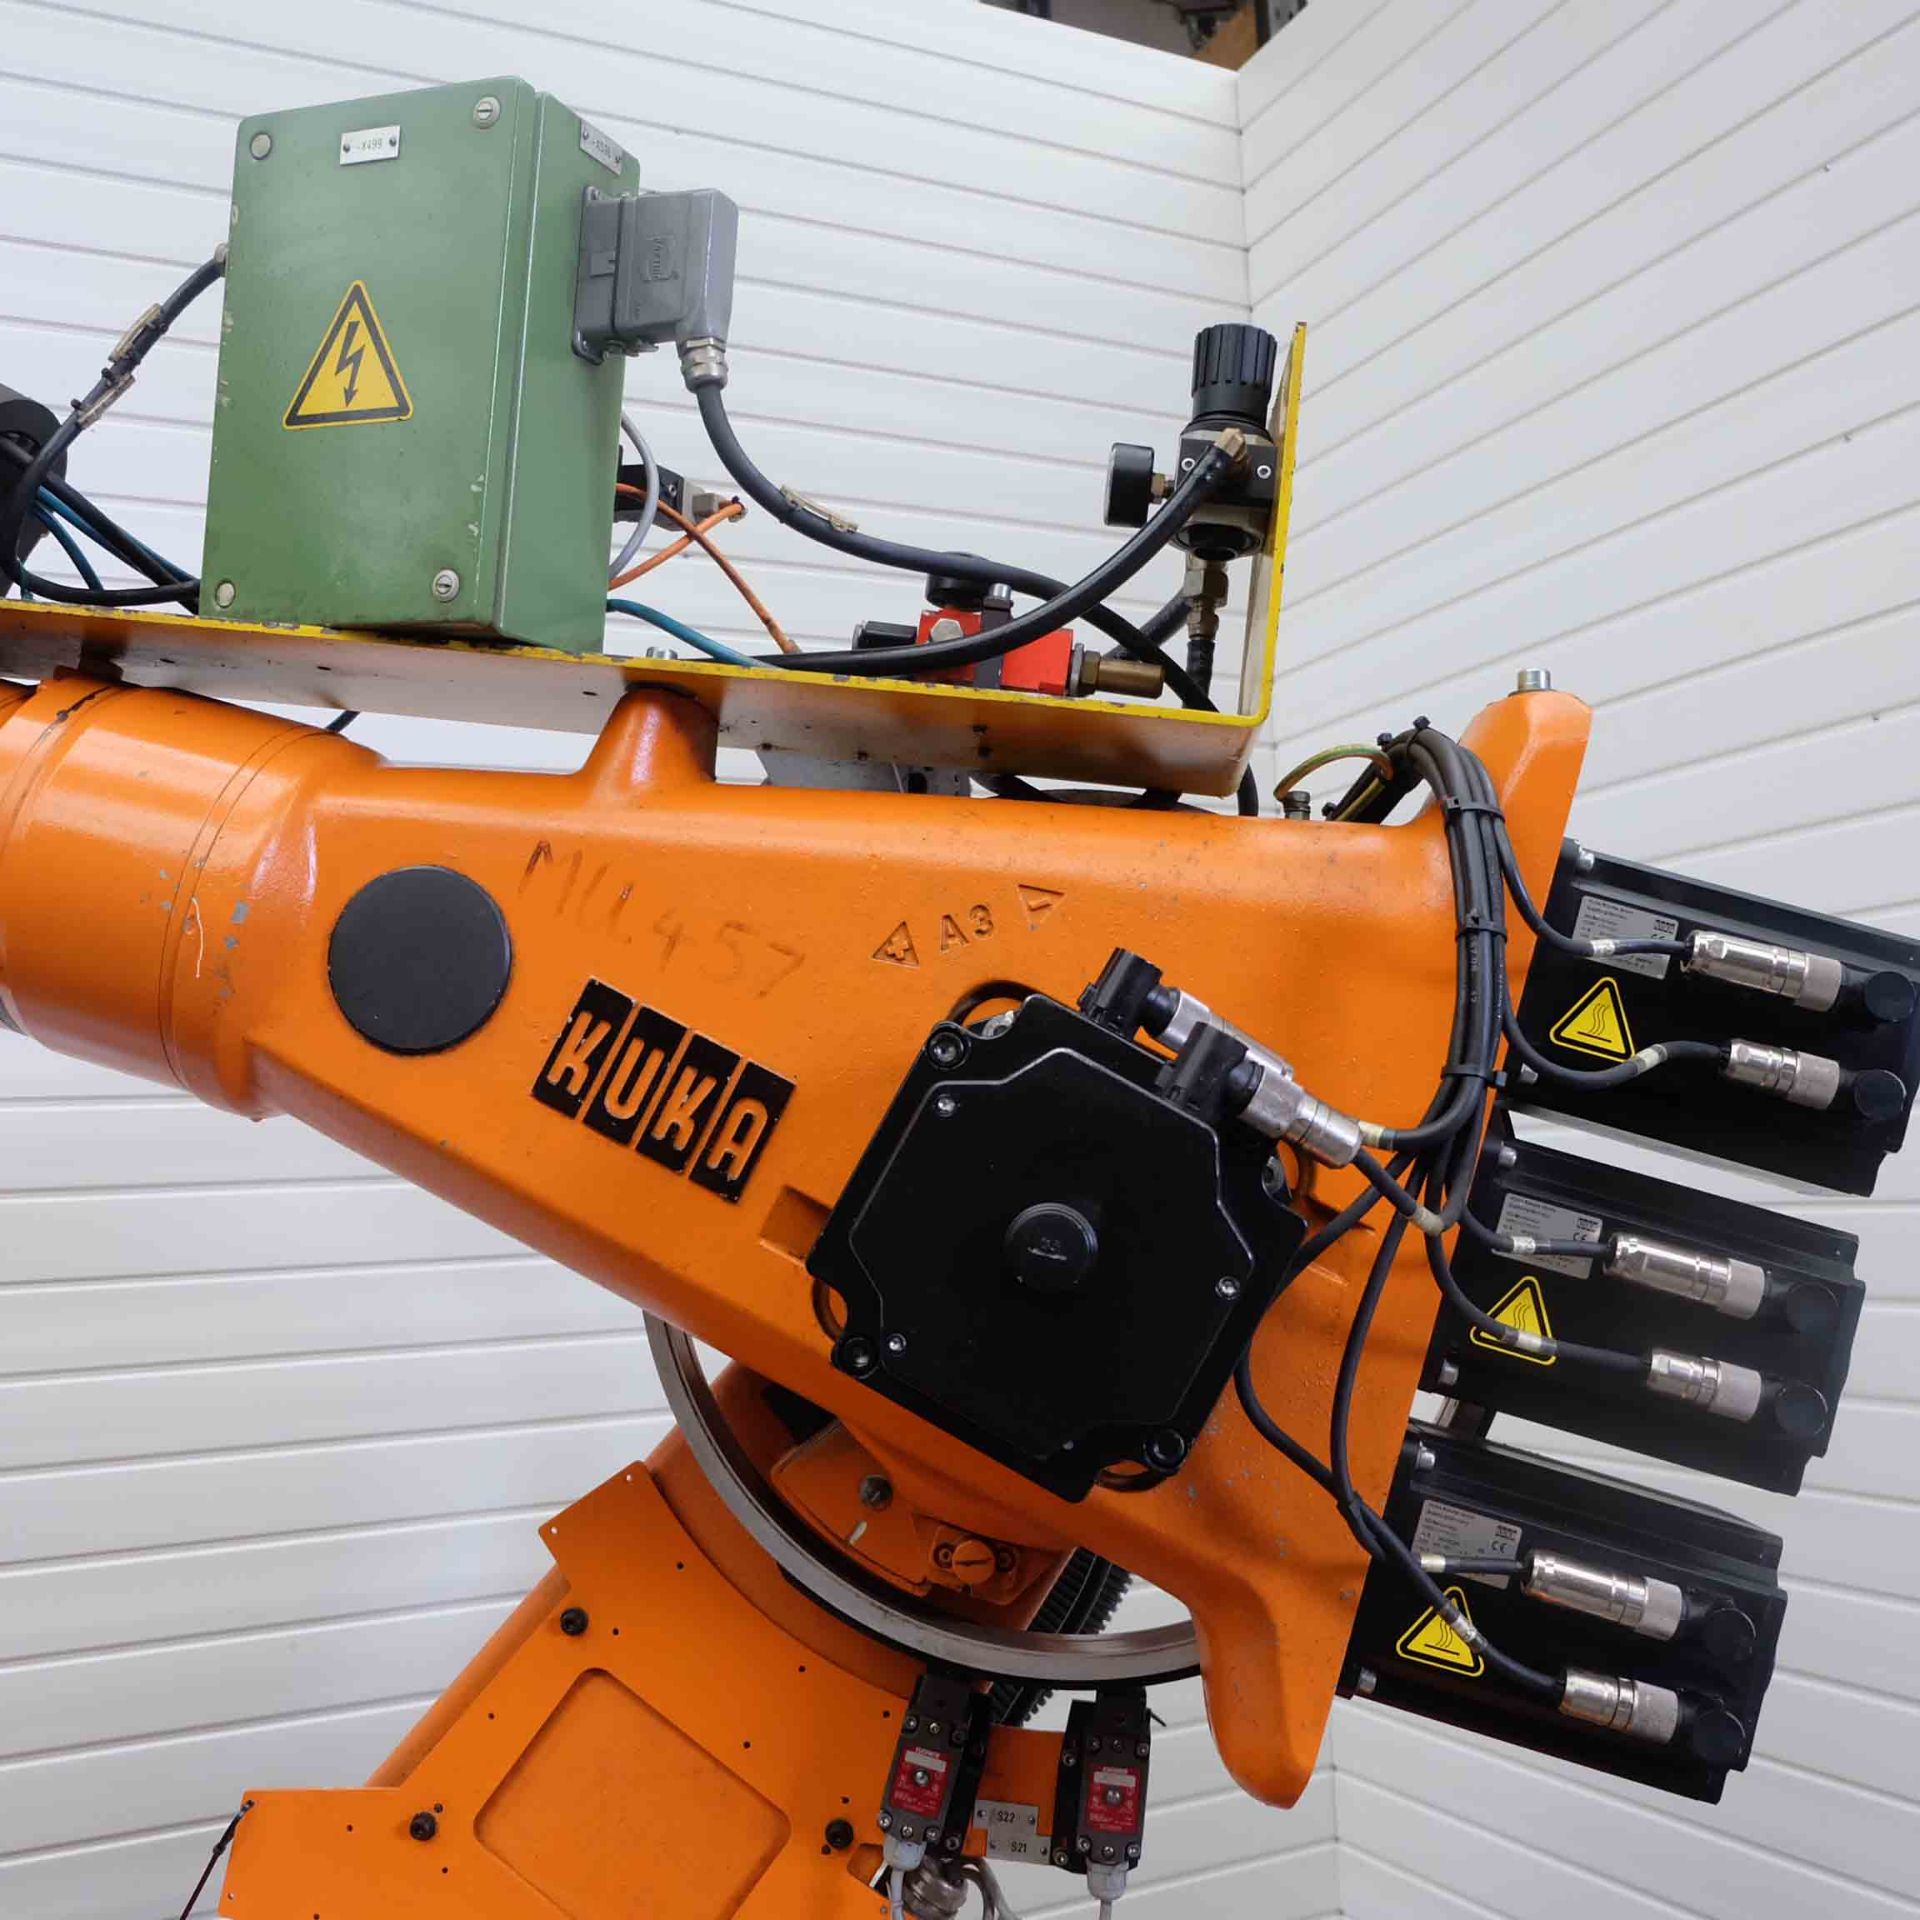 2 x Kuka Type KR125 6 Axis Robotic Arms. (1 Complete & 1 Incomplete). - Image 30 of 35